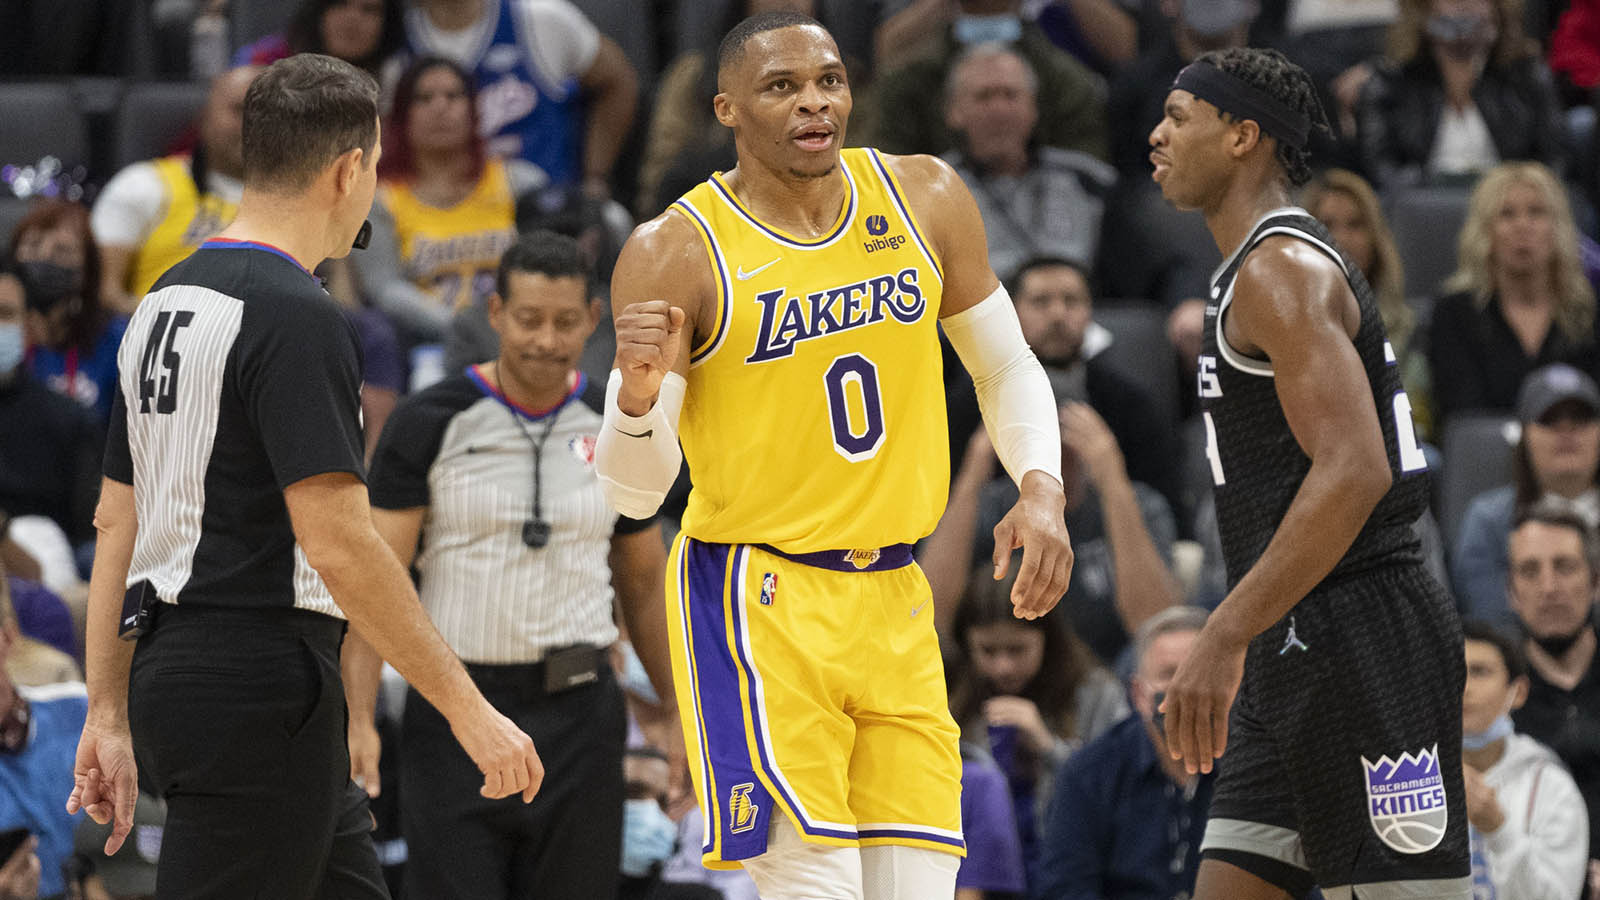 Lakers Picked Russell Westbrook Trade Over Buddy Hield